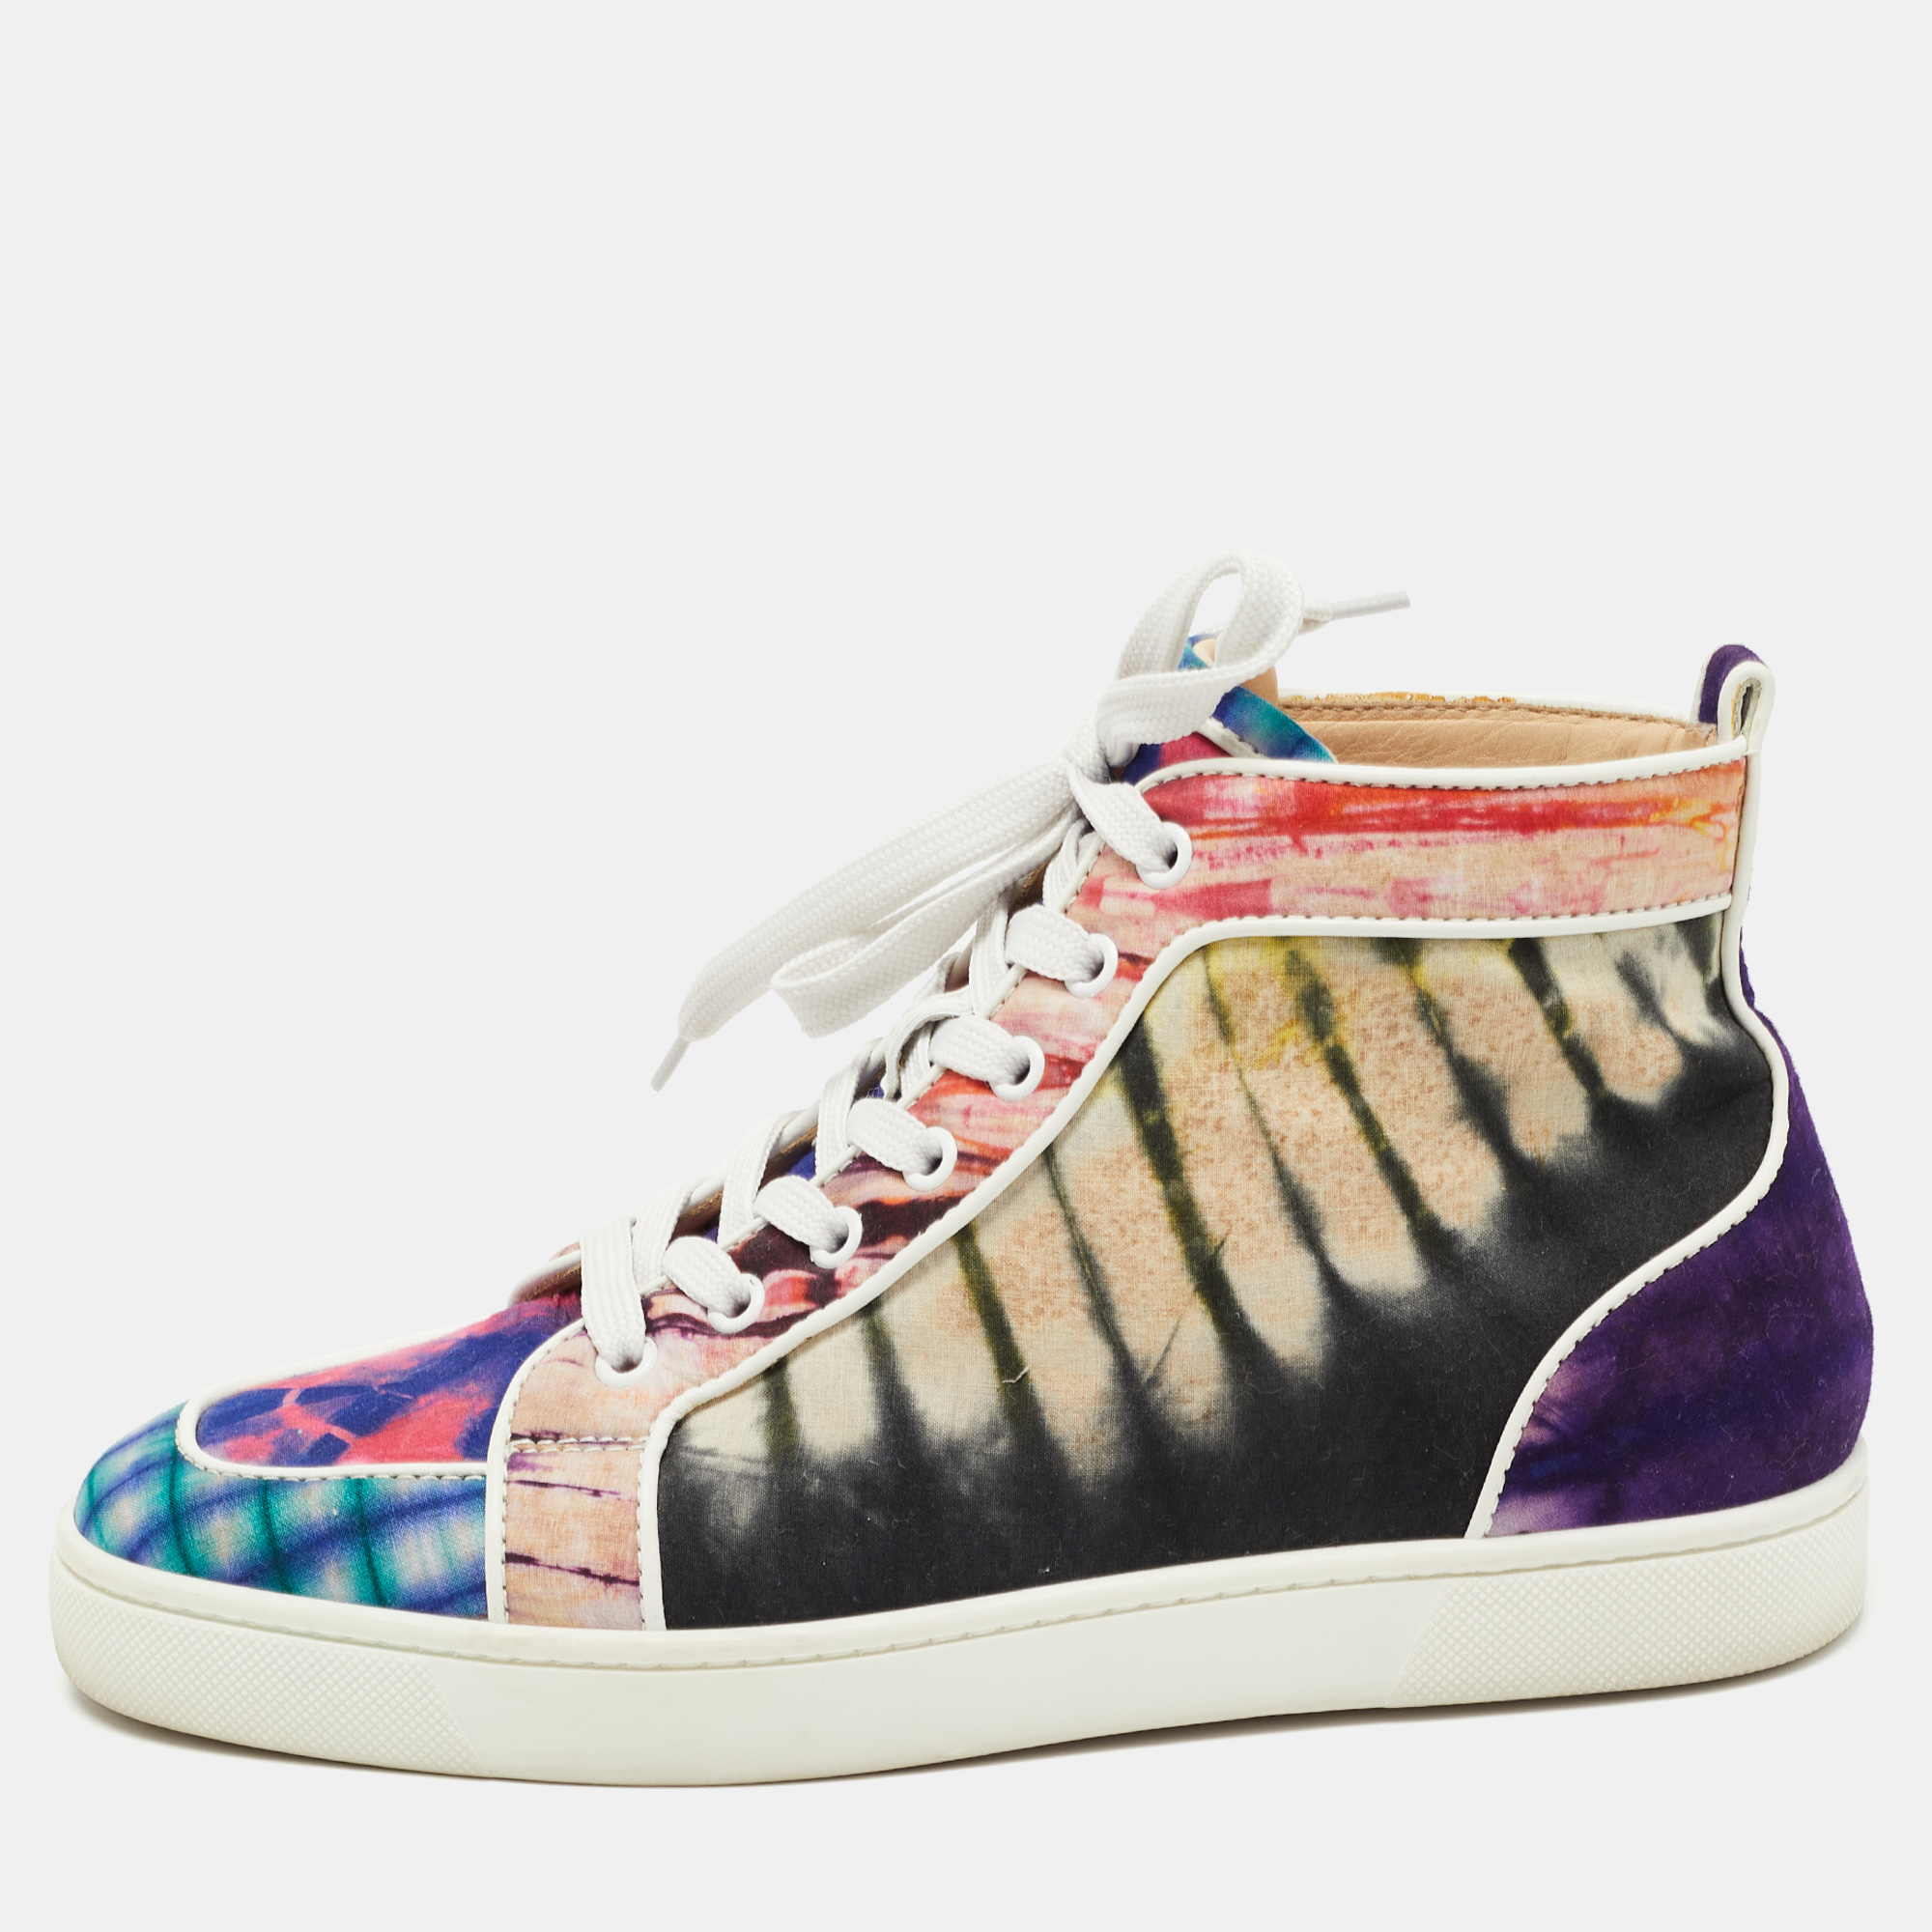 Pre-owned Christian Louboutin Multicolor Fabric Tie Dye High Top Sneakers Size 39.5